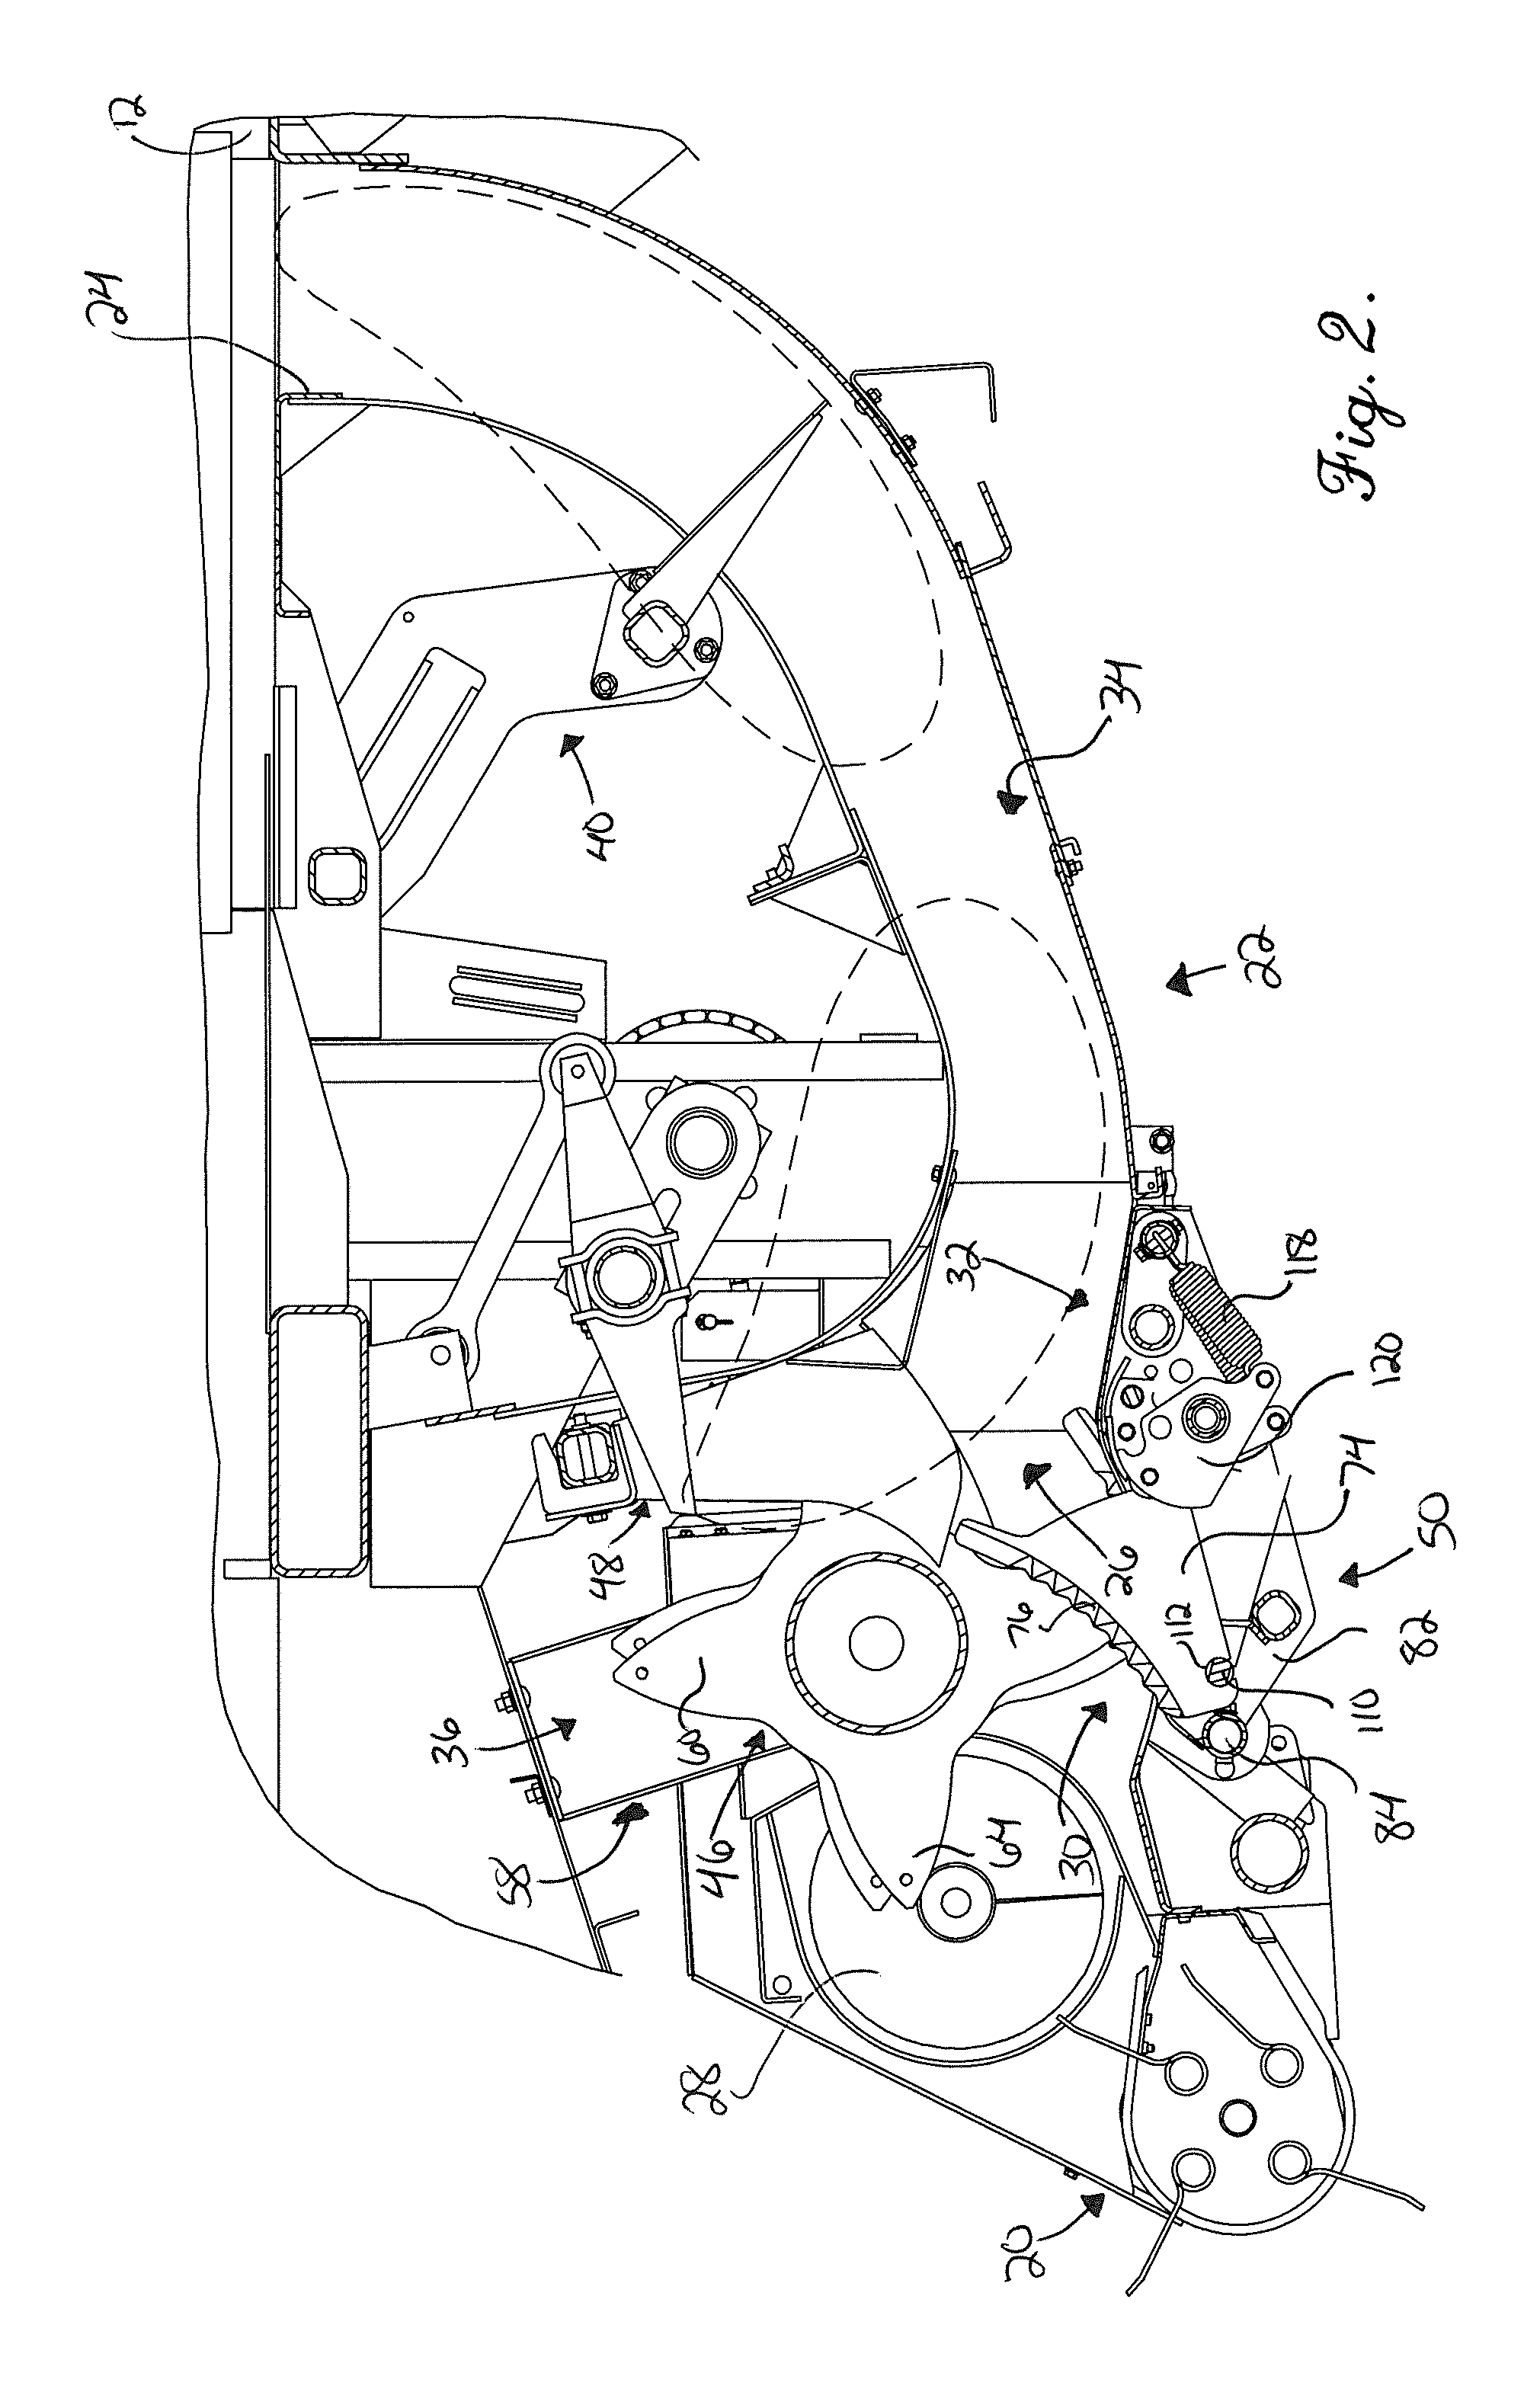 Agricultural implement having knife load responsive infeed cutter